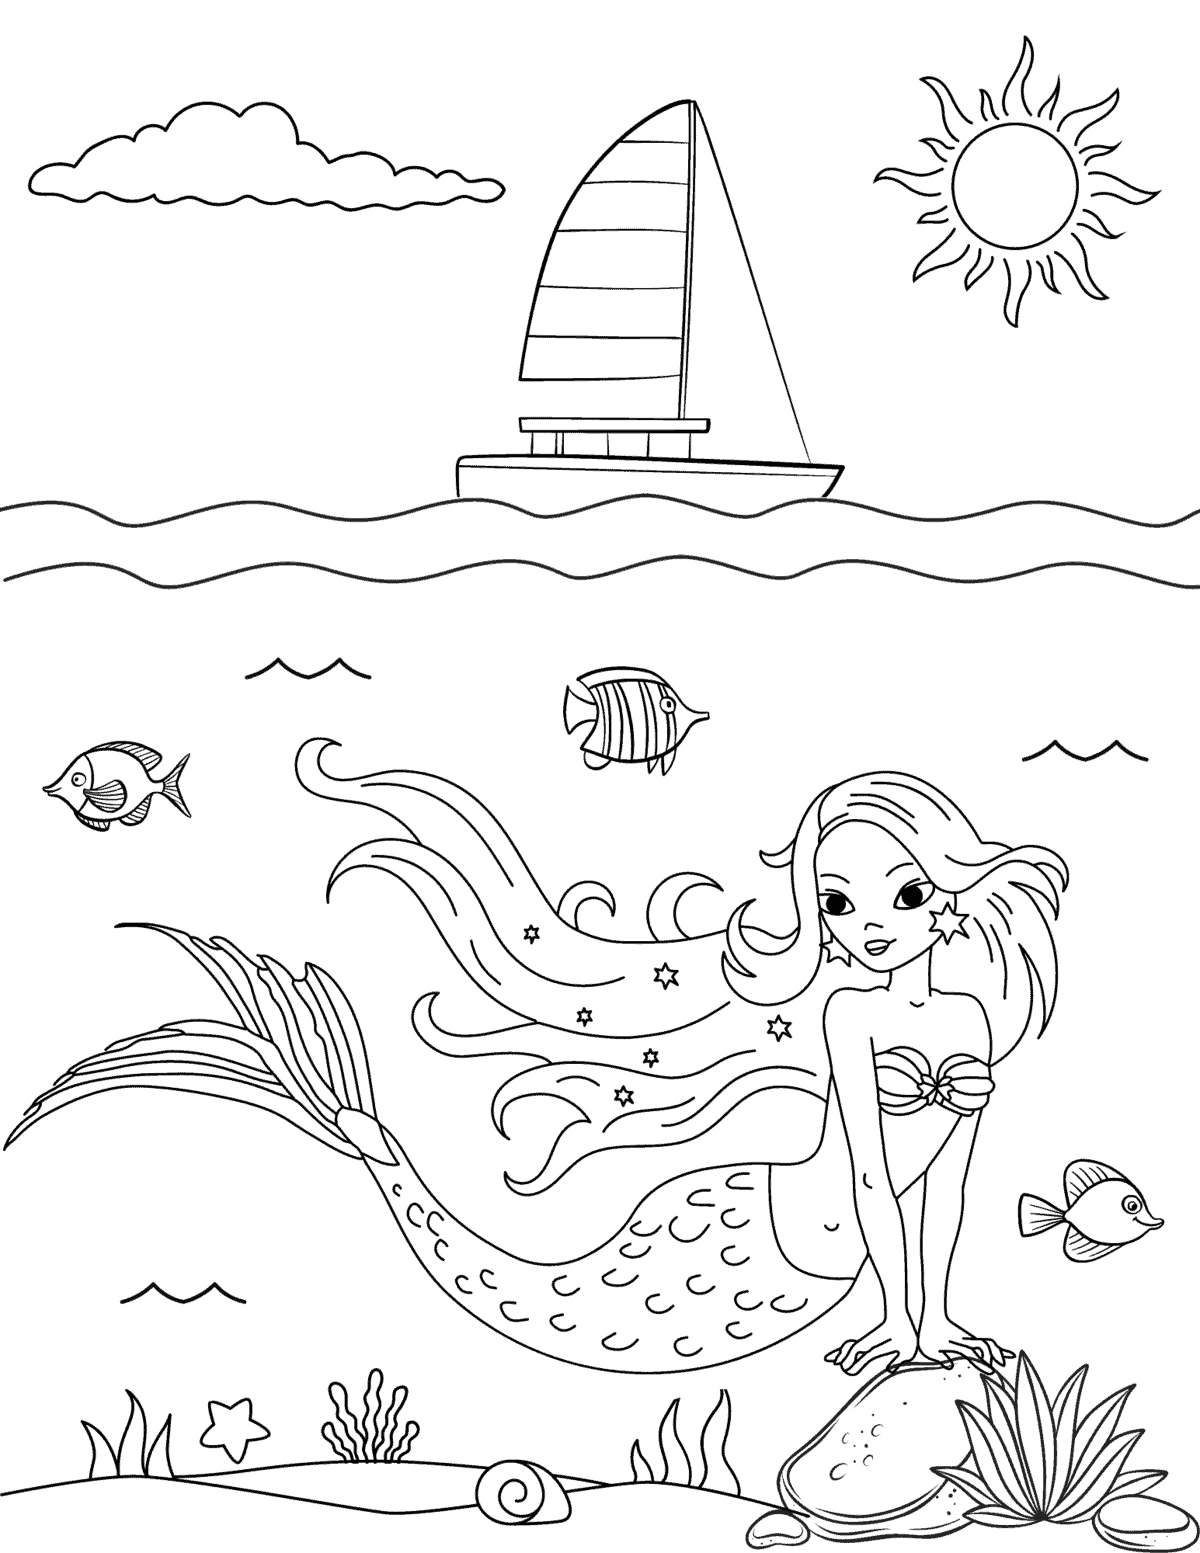 mermaid leaning on a rock in the ocean with a sailboat in the background